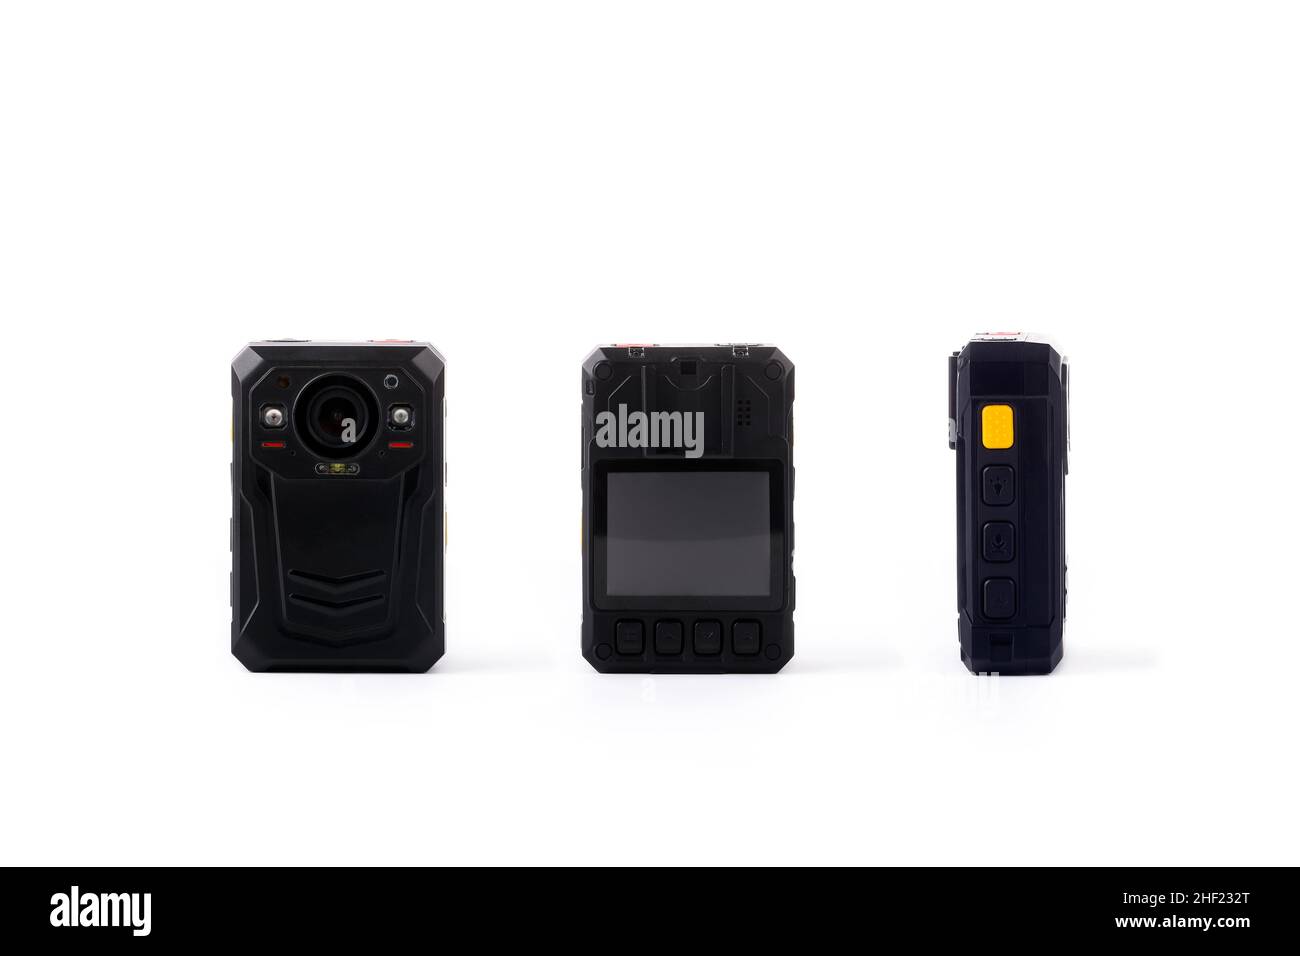 Officer body cam. Personal Wearable Video Recorder, Portable DVR, camera isolated on white background. Closeup, front view, back view, side view. Stock Photo